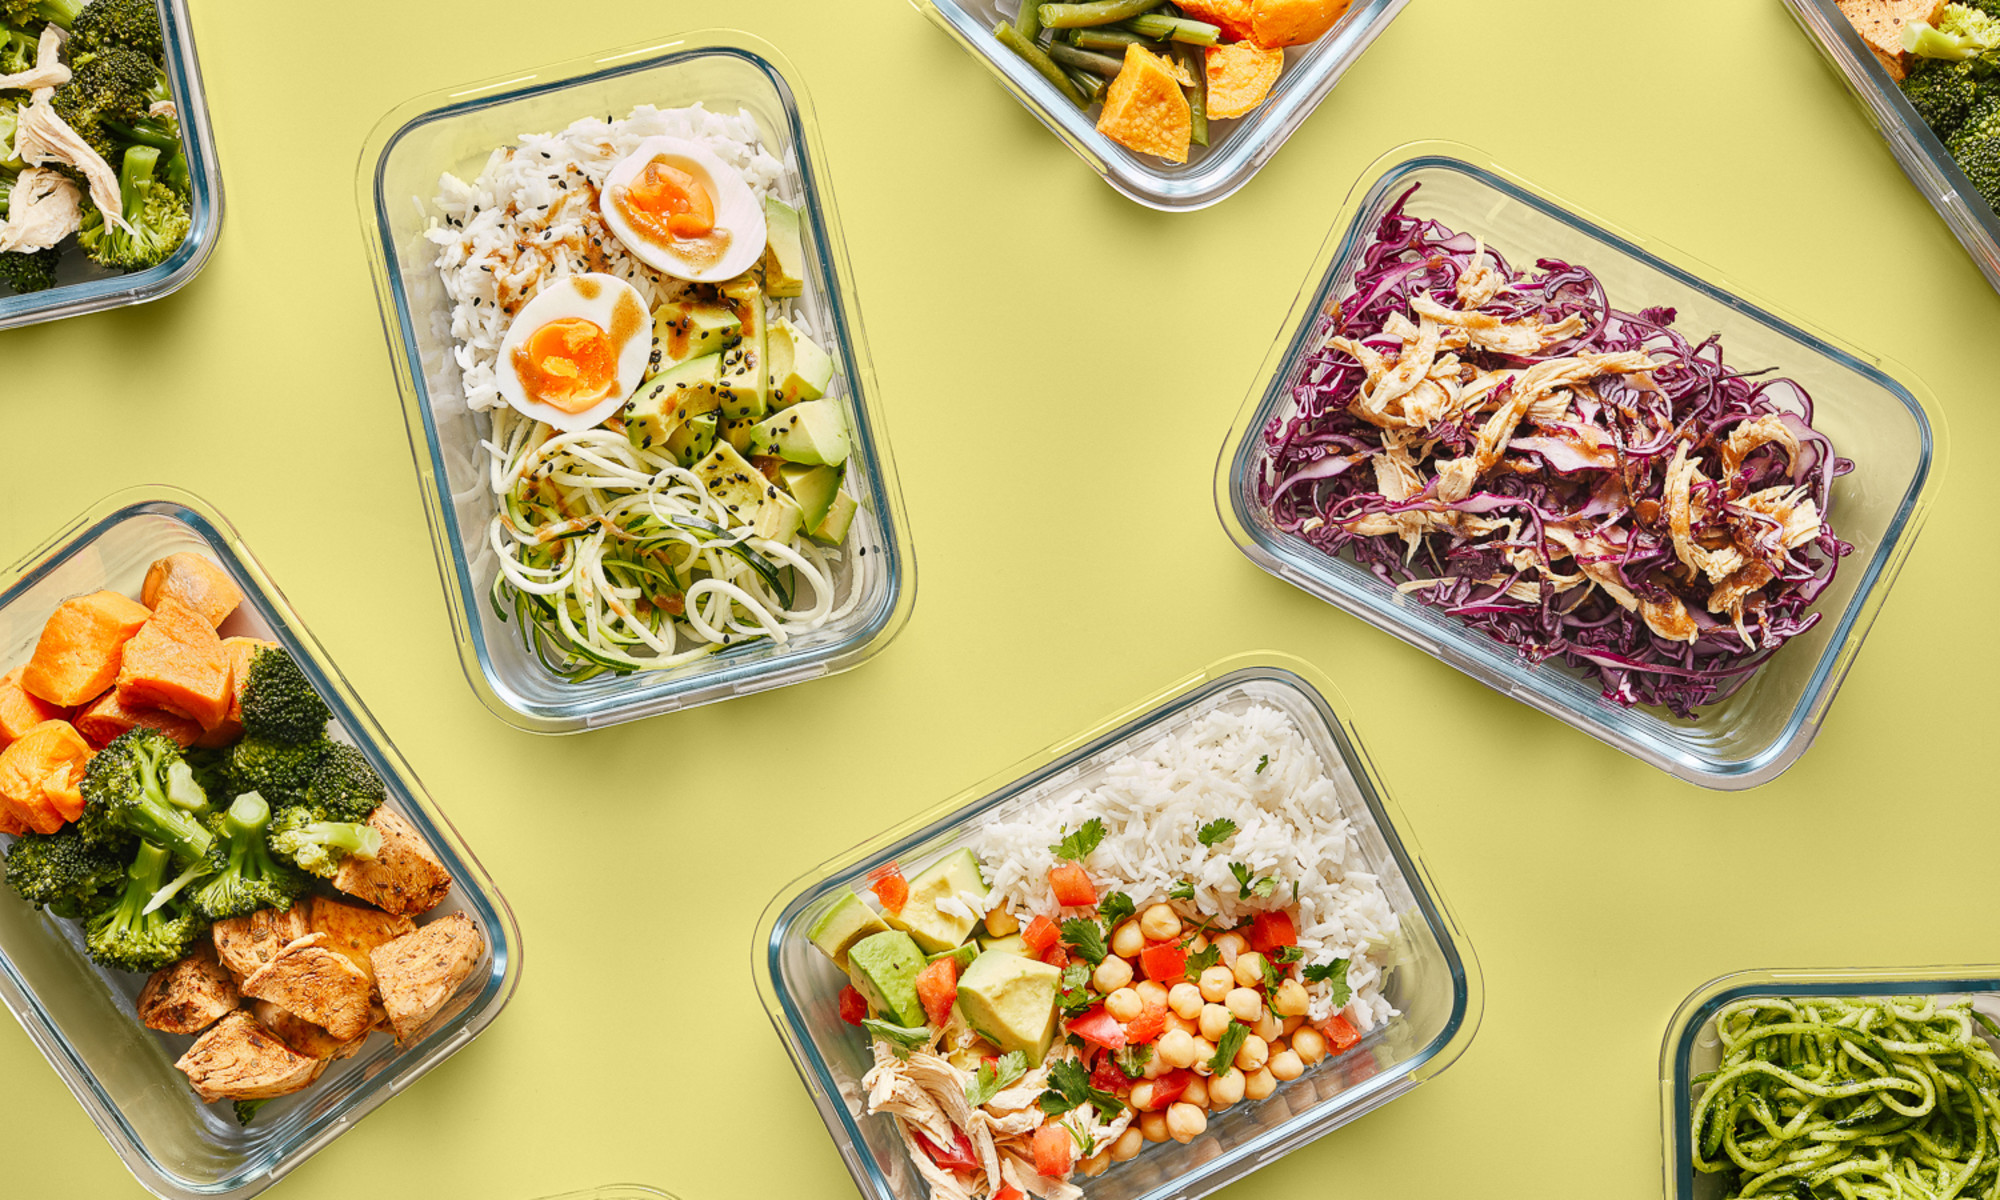 Want A Meal Delivery Service Without The Waste? 5 More Sustainable Options